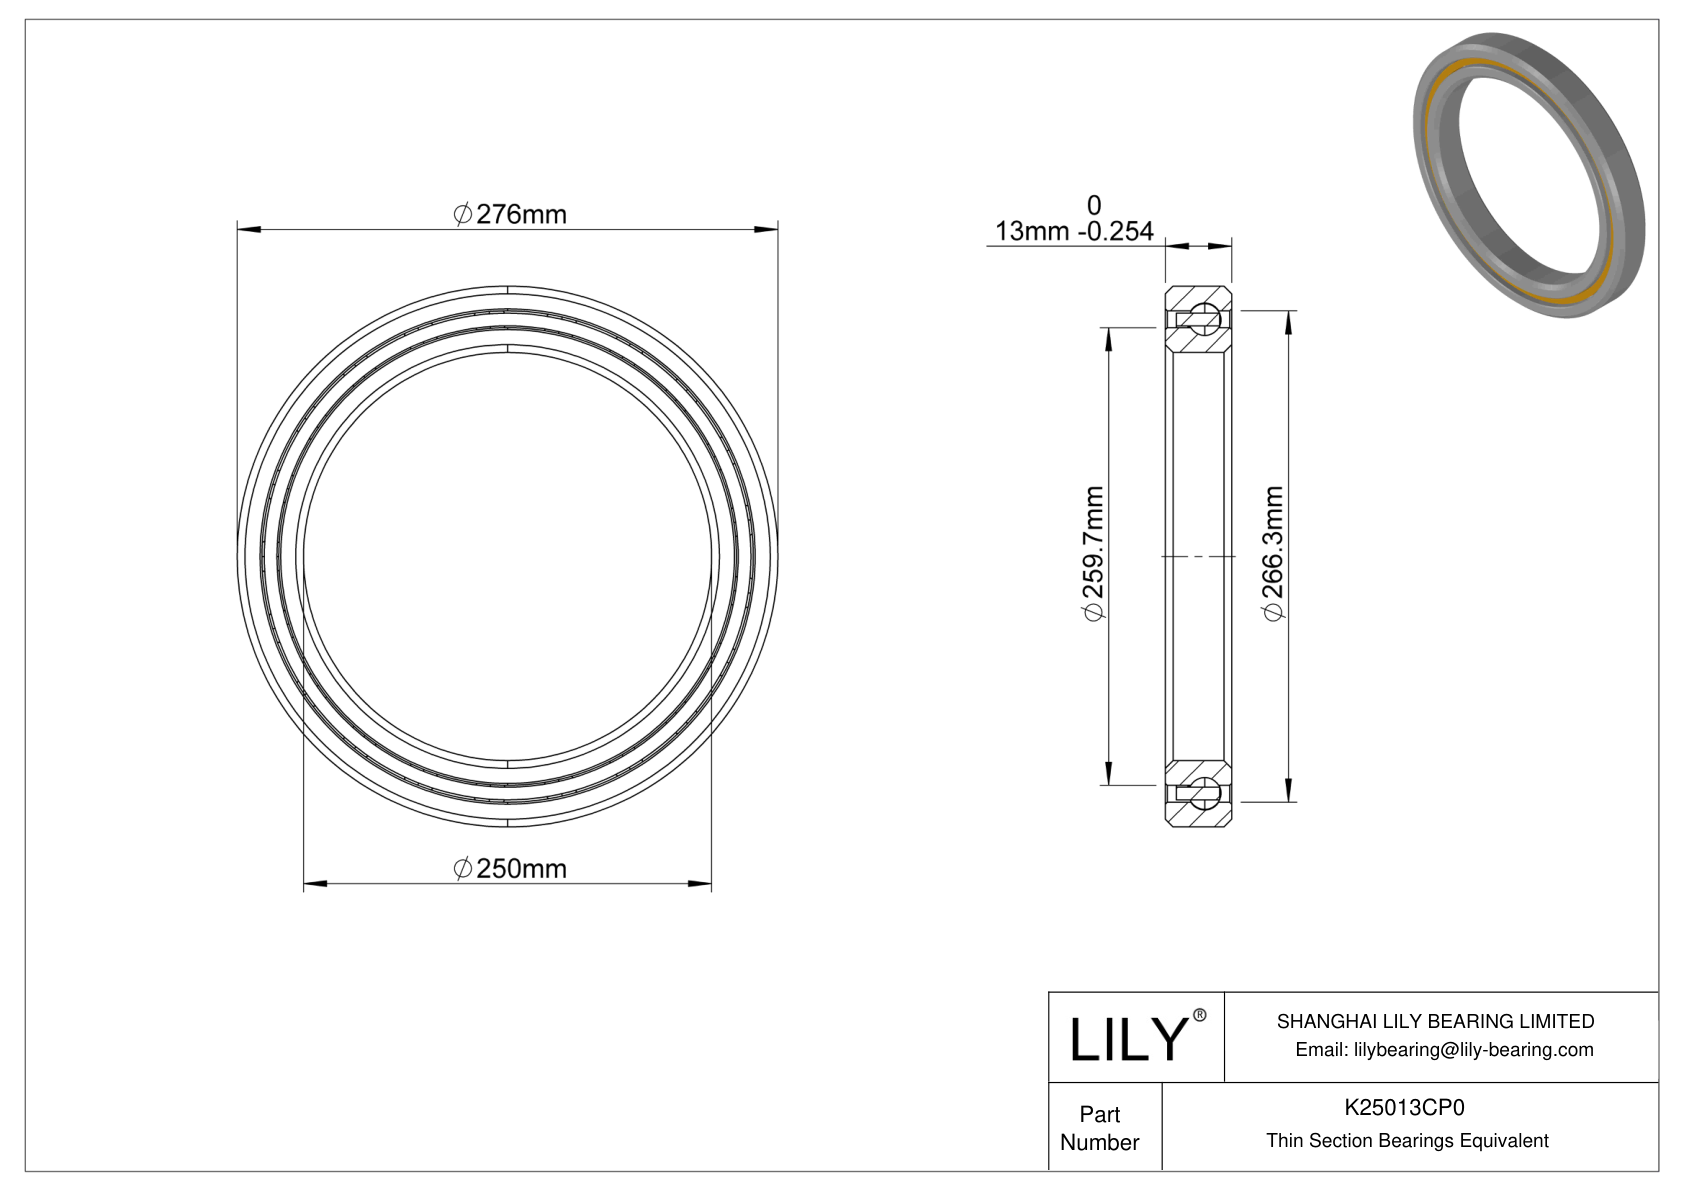 K25013CP0 Constant Section (CS) Bearings cad drawing